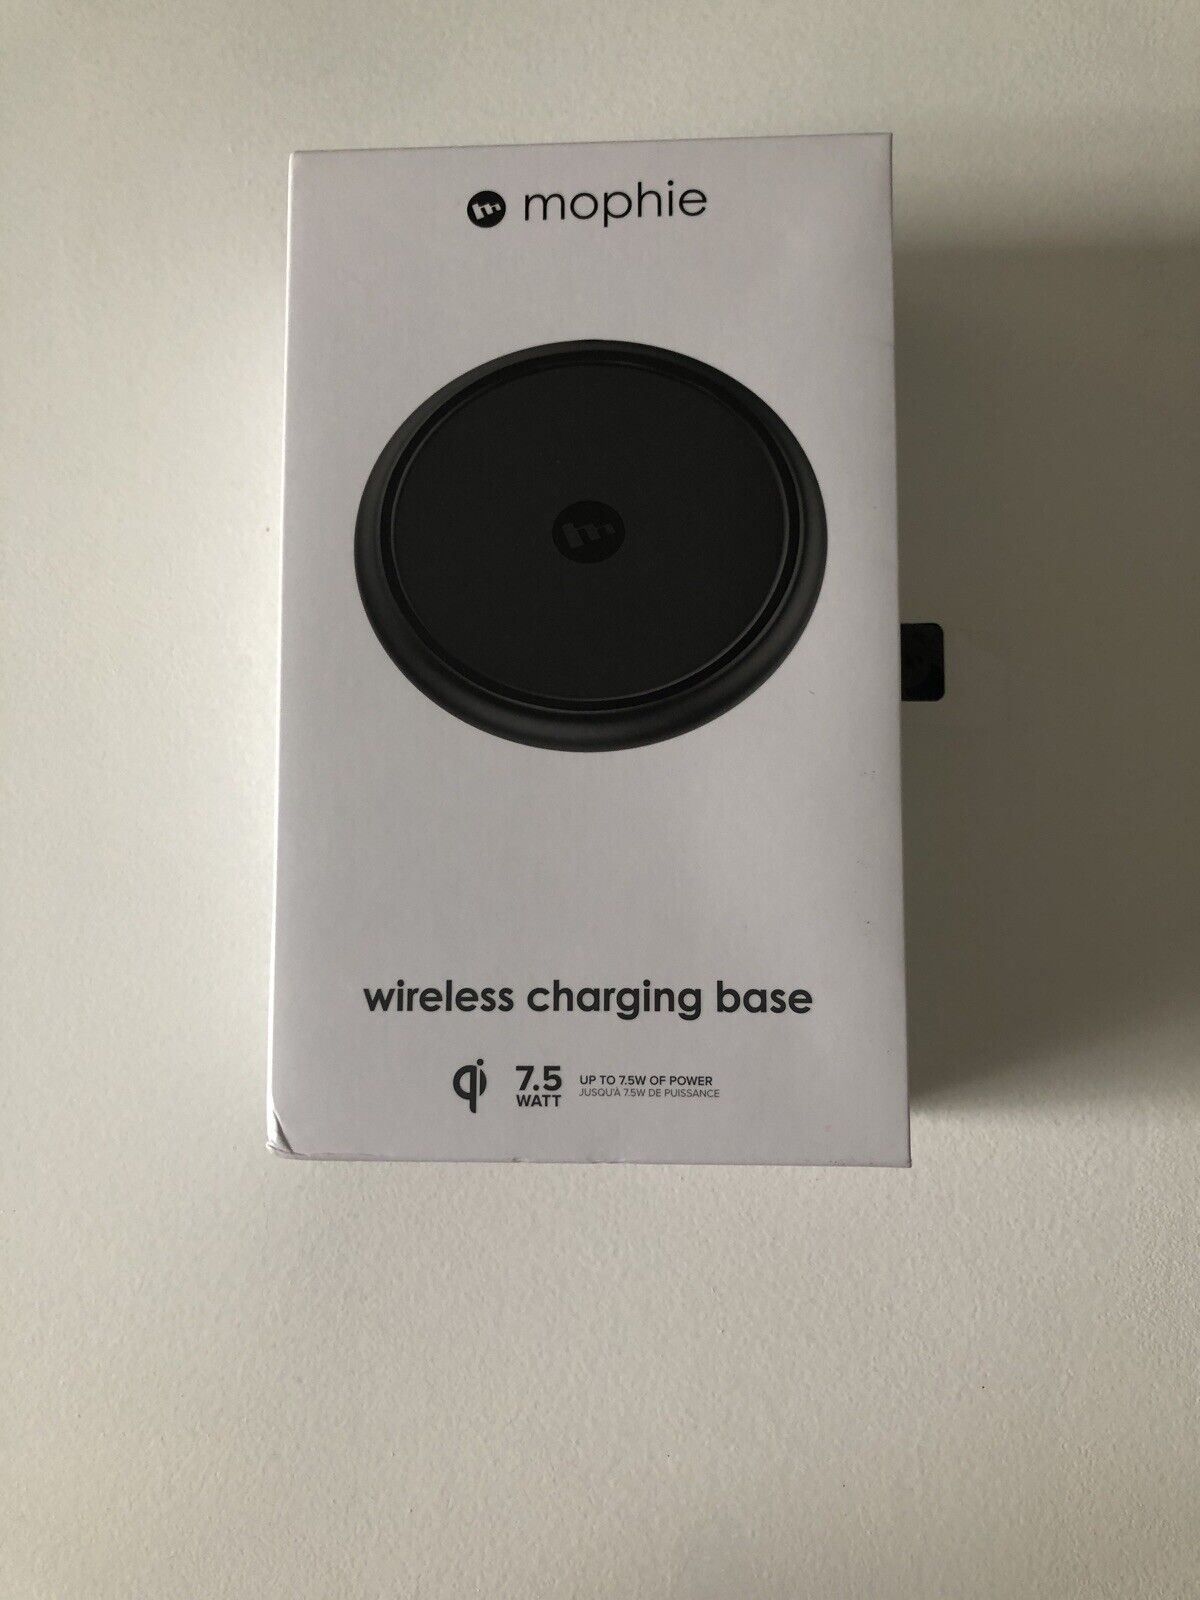 Box for Mophie Wireless Charging Base for Qi Charging Compatible iPhone/Android